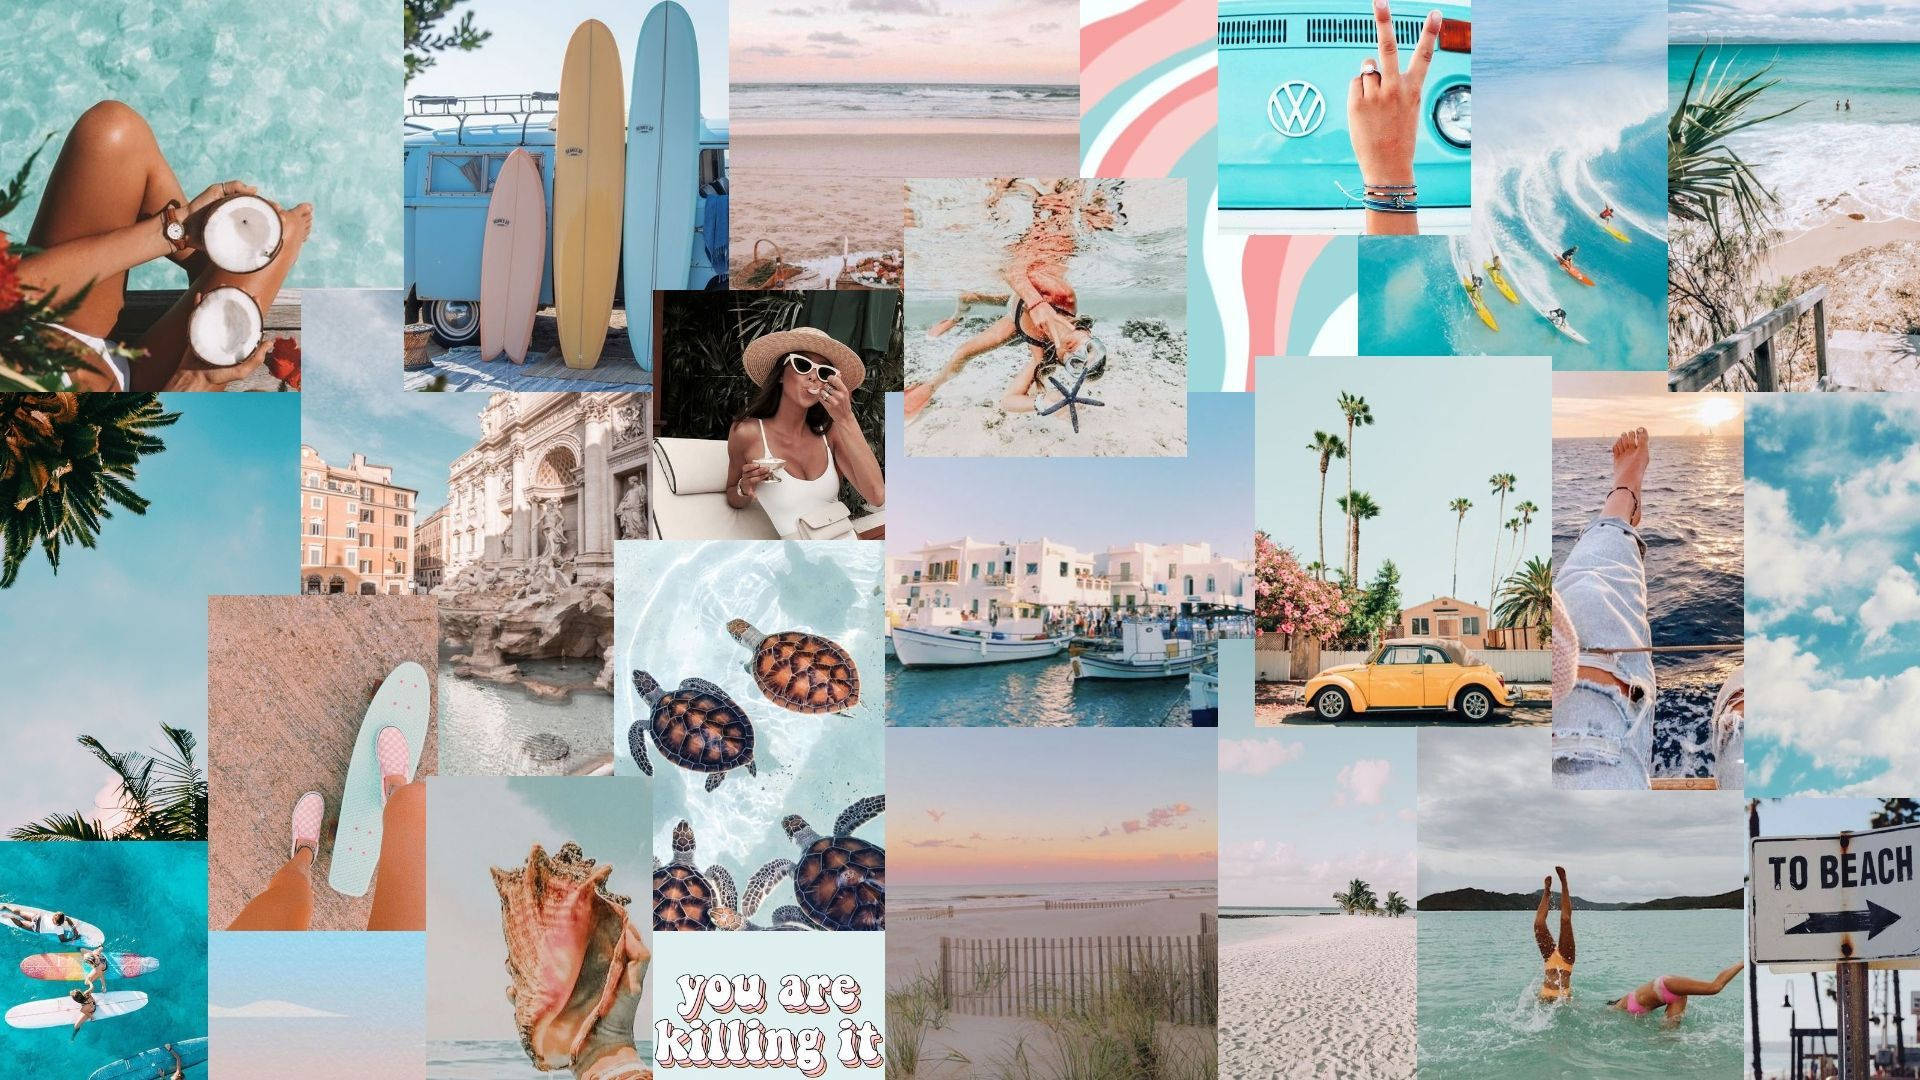 Get Ready for Summer with this Stylish Laptop Wallpaper